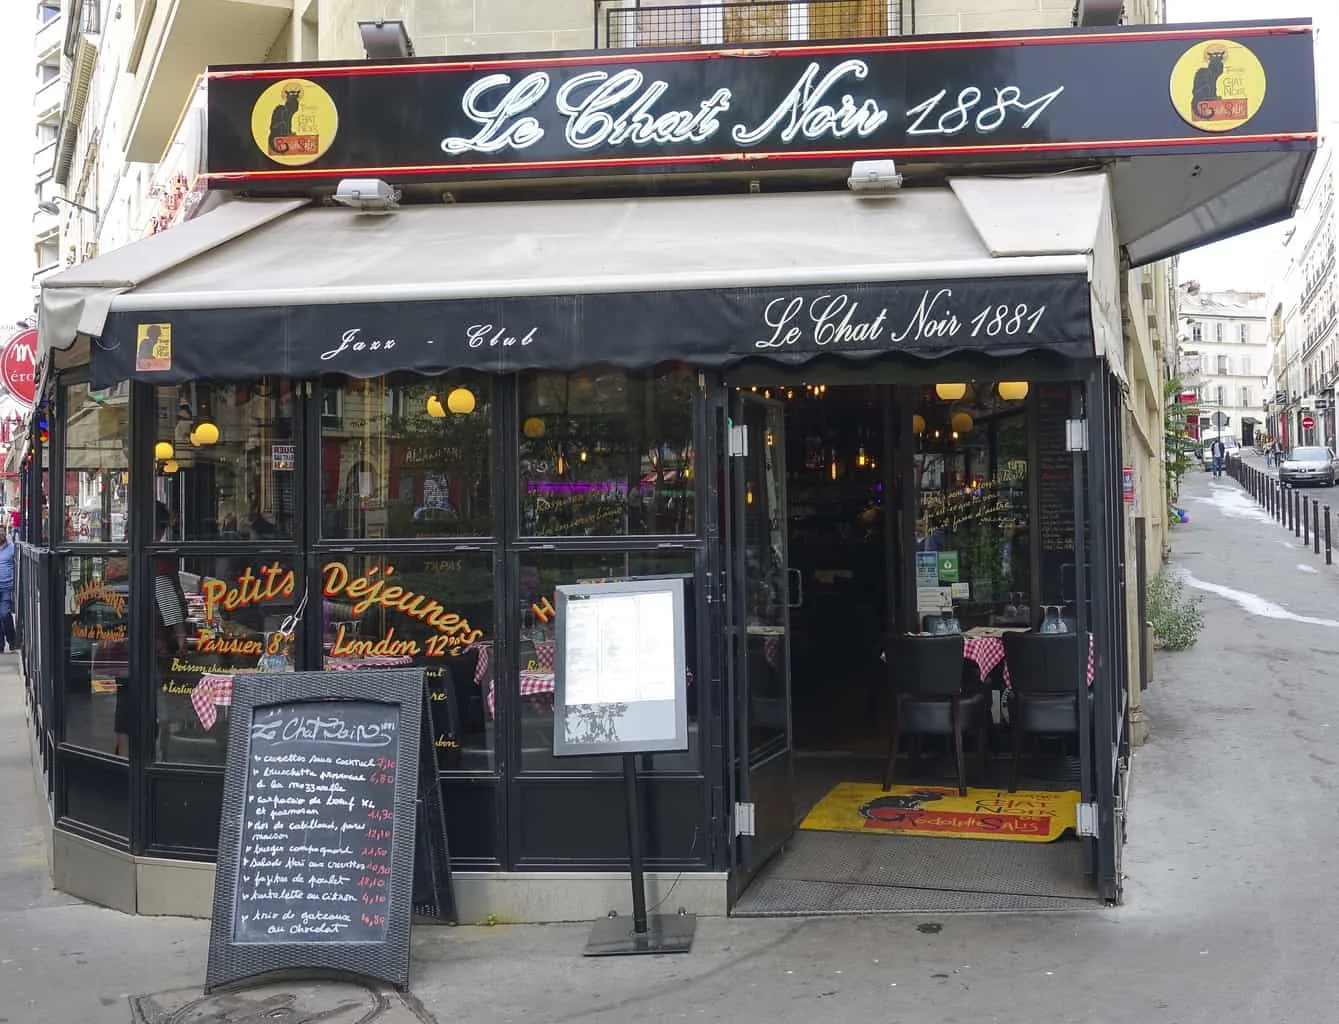 Le Chat Noir is without a doubt, one of the most famous cafes in Paris.